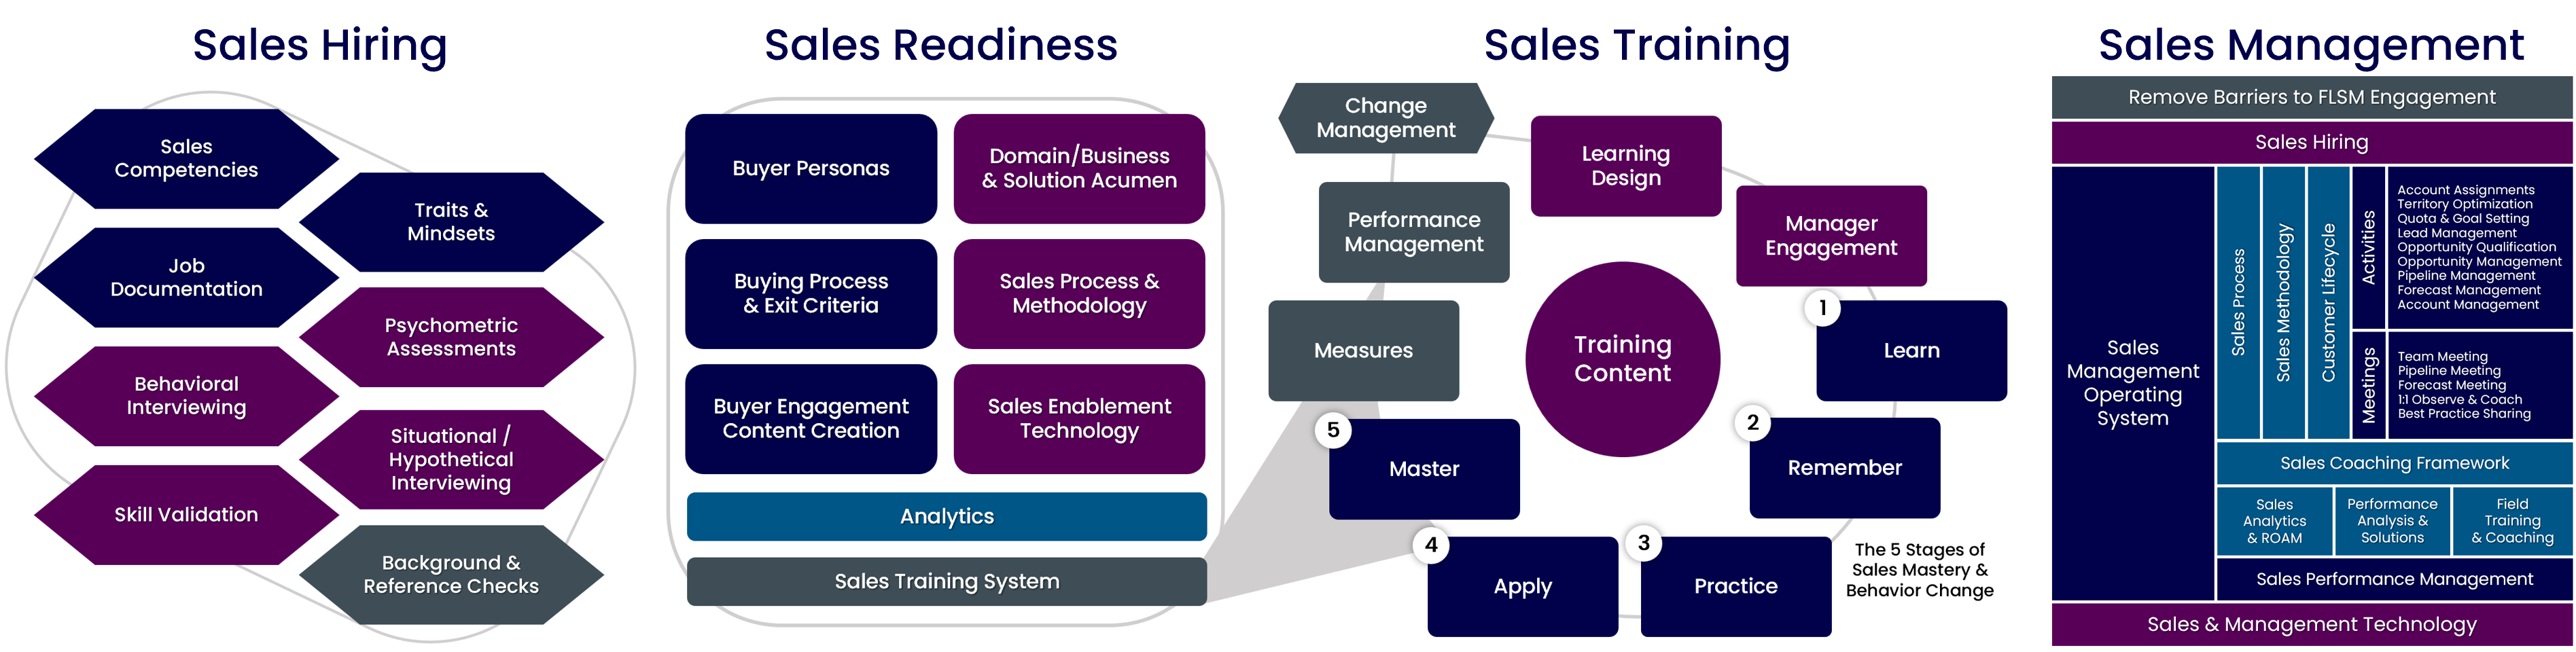 Four Sales Systems